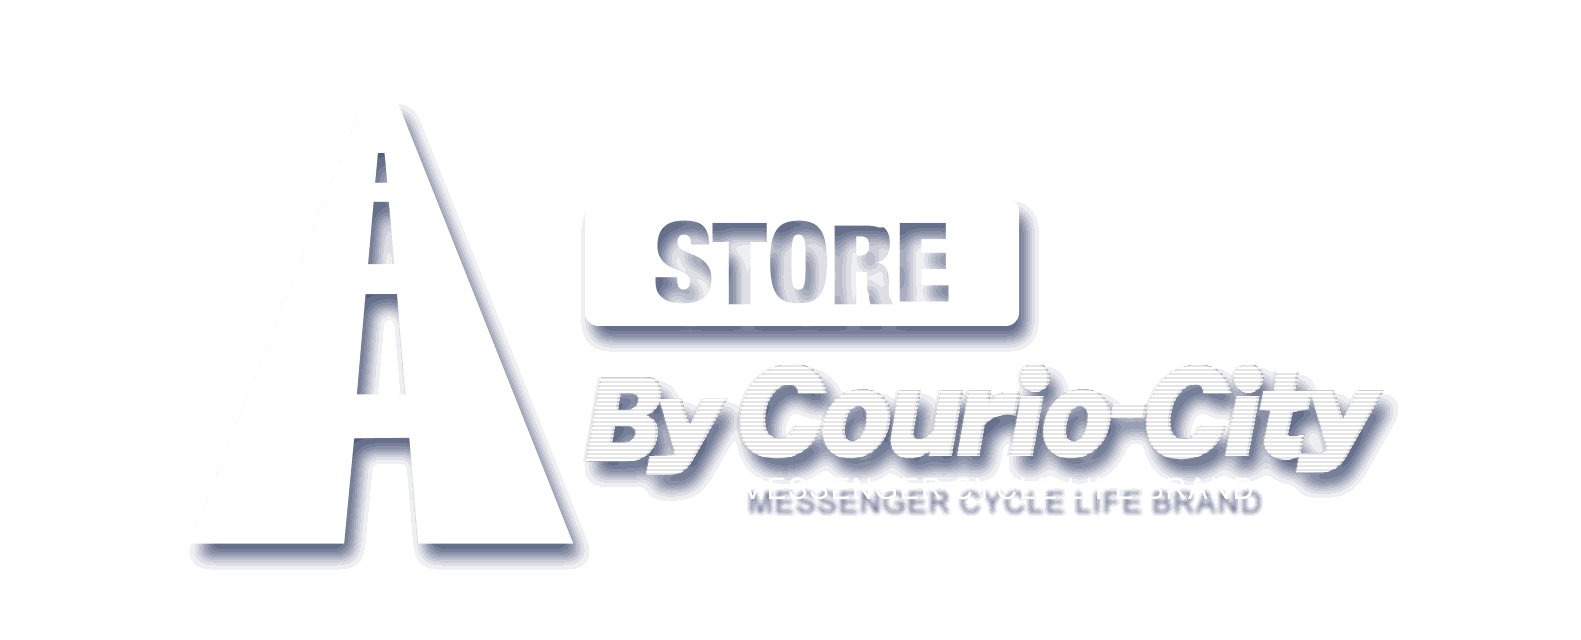 A By Courio-City STORE